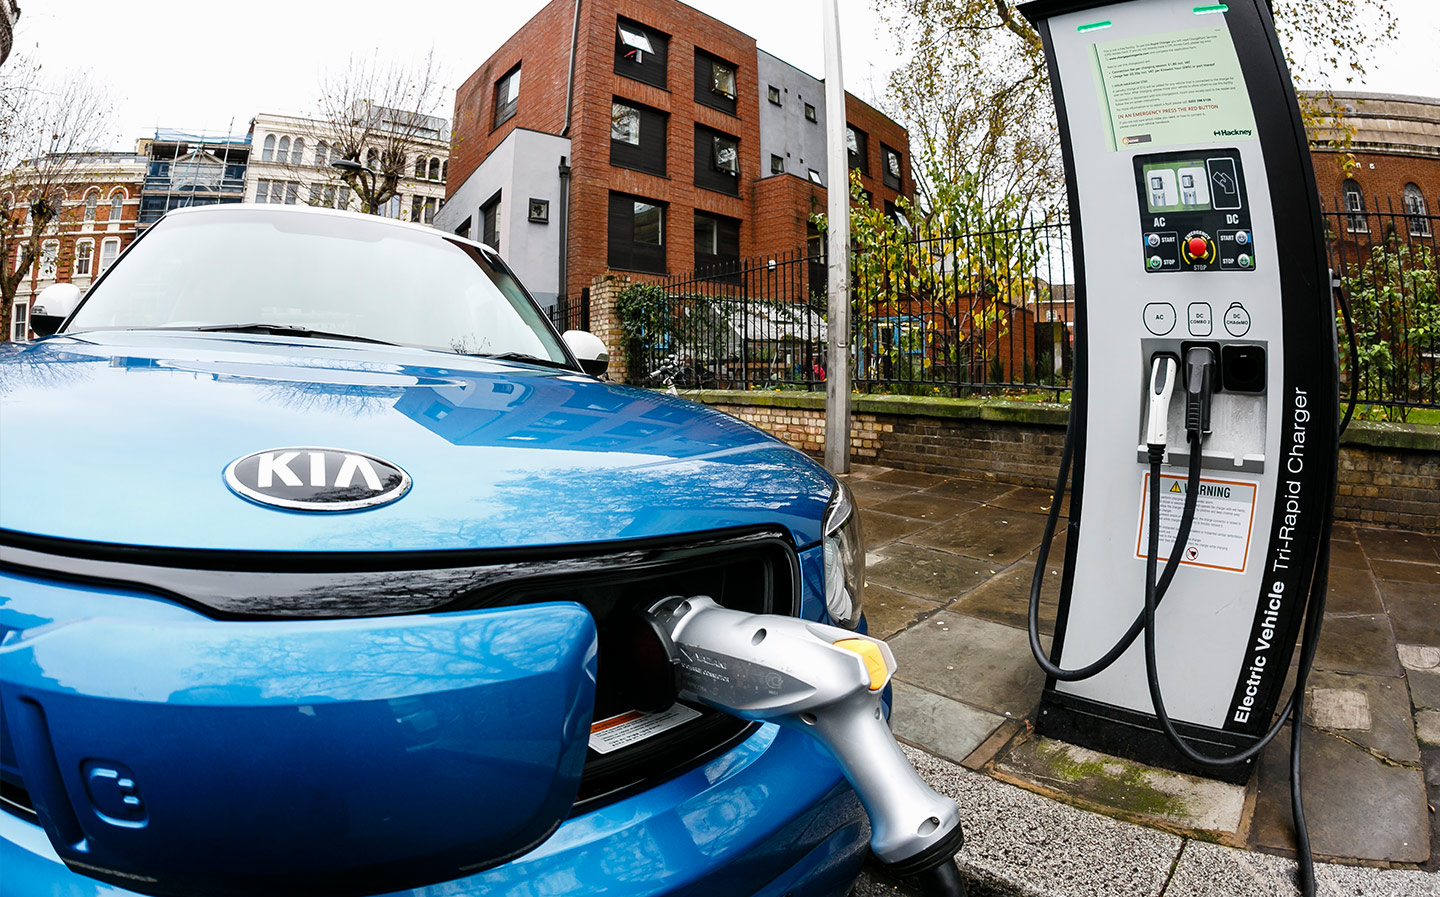 Reader Letters: electric car charging standards and towing, M42 refuge, handbrakes on automatics and comfy seats